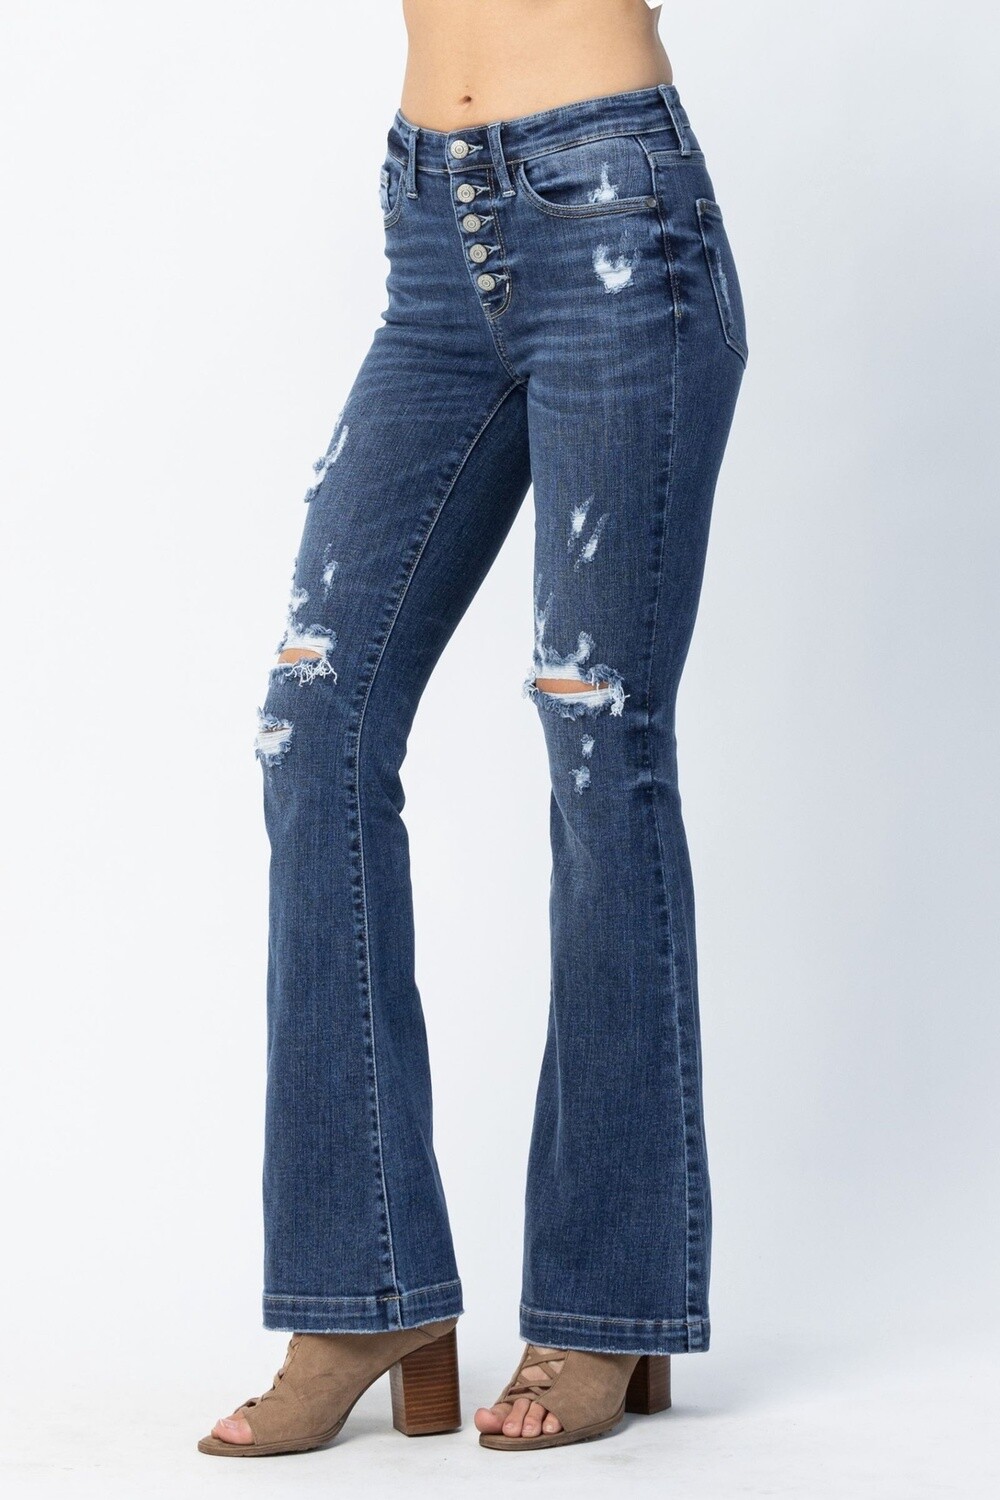 Women's Button Fly Destroyed Flare Jeans #82430